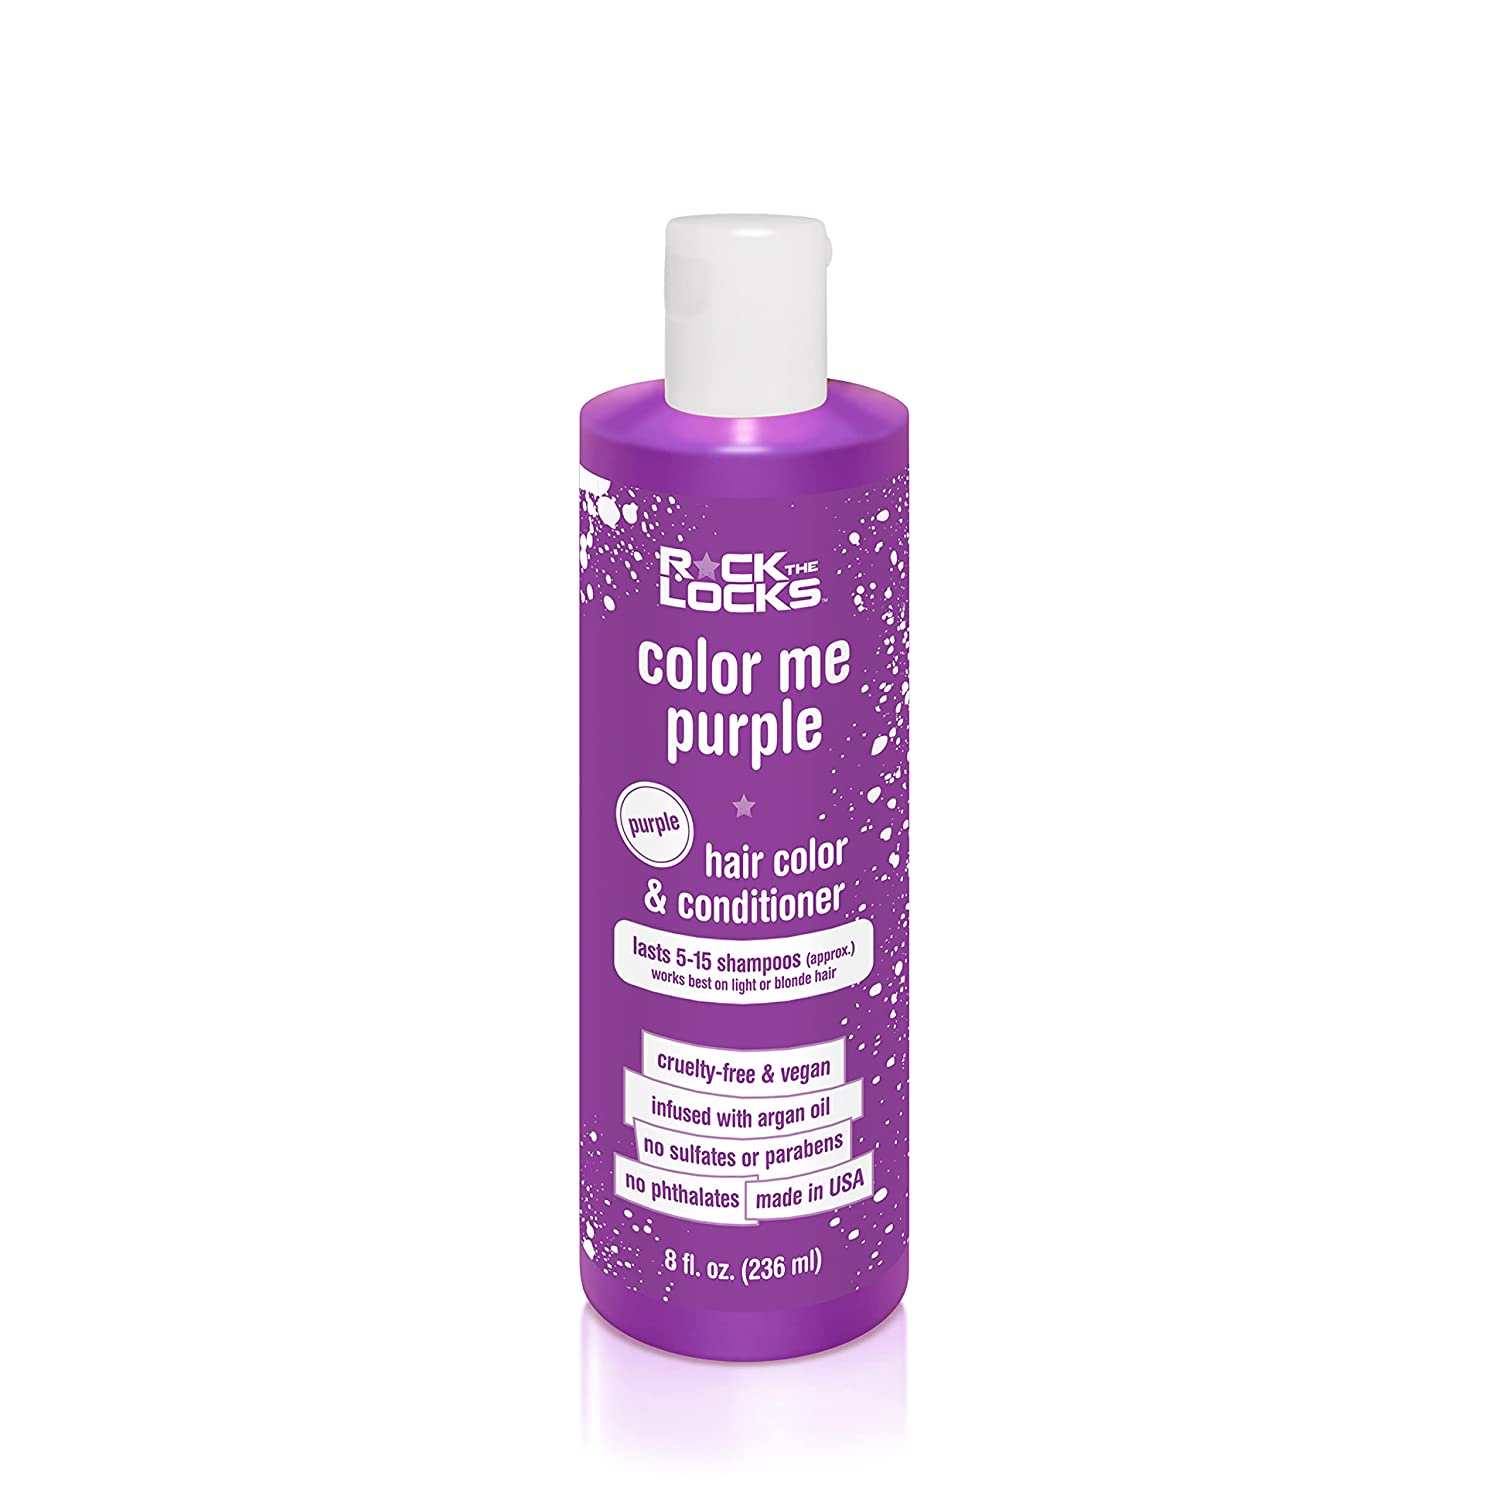 Rock the Locks | HAIR Color & Conditioner (All in One Bottle!) | Bright Purple Color | Argan Oil to 